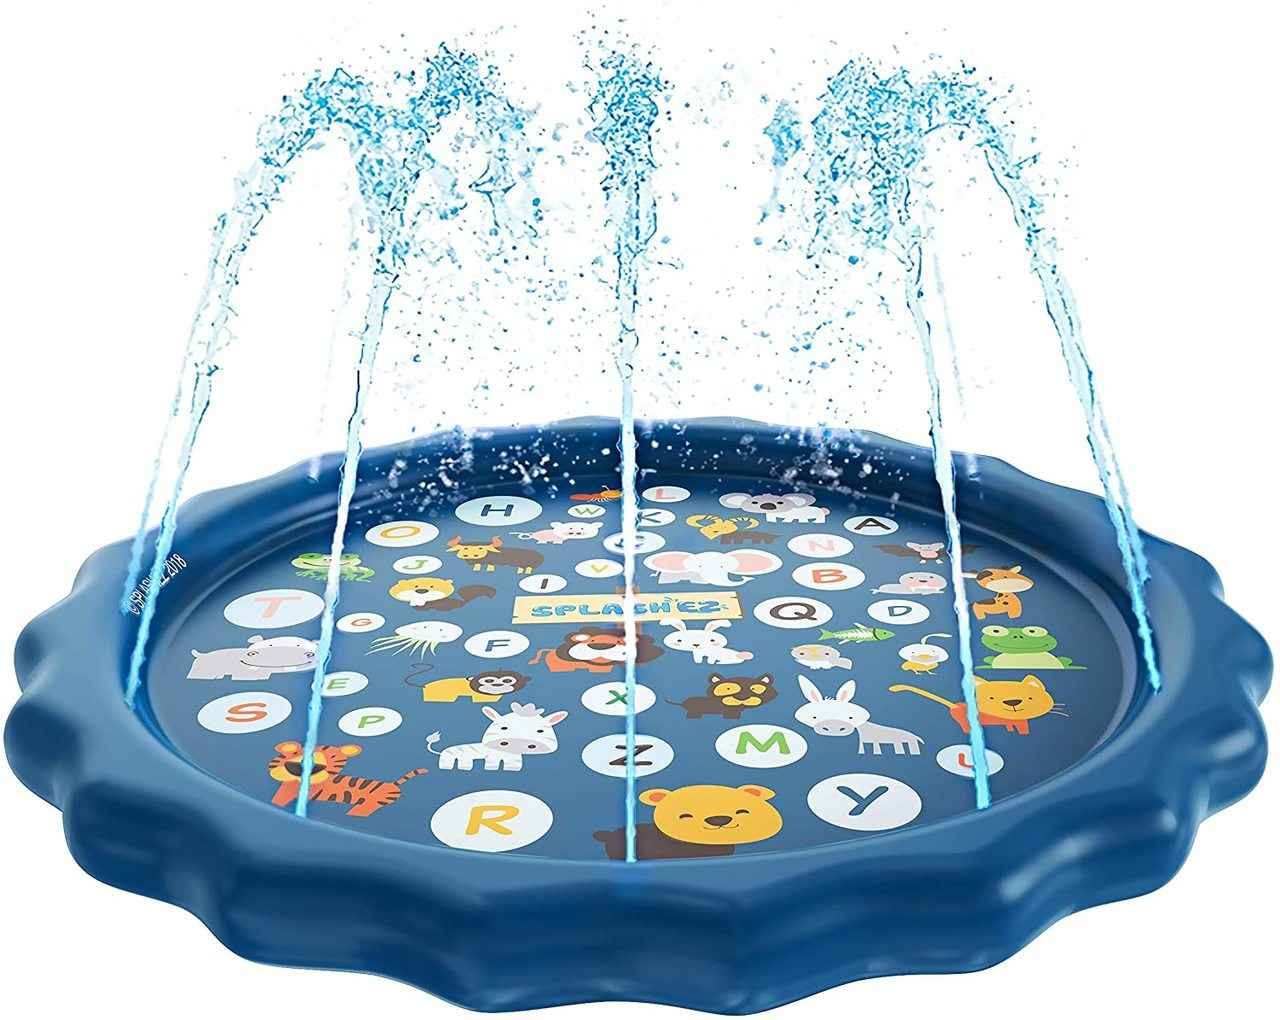 Paddling pools for kids Inflatable Sprinkler Mat Swimming Pool for toddlers  Age 3+ and Splash Pad Wading Pool for Fountain Games , Summer Backyard  Garden Spray Water Toys for Outdoor kids Fun Play